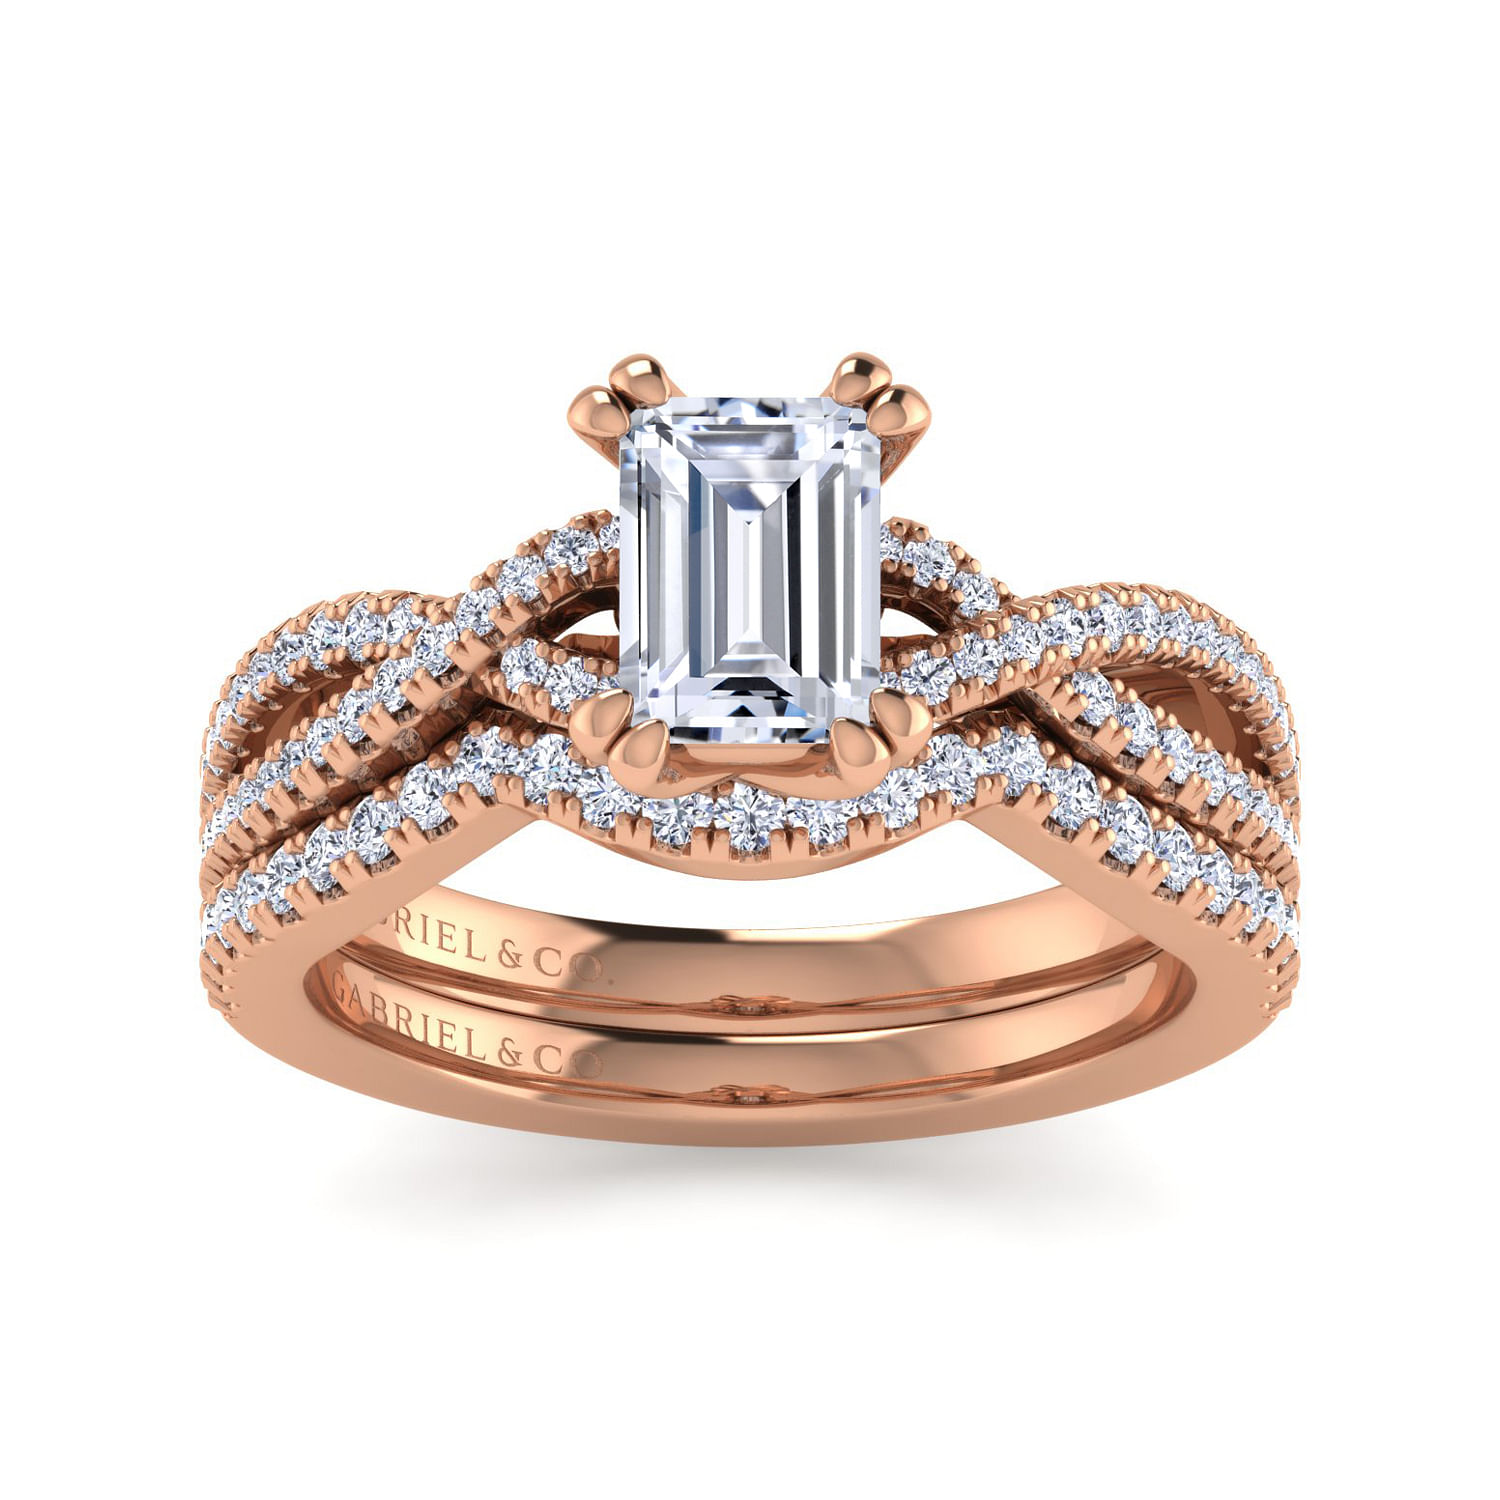 14K Rose Gold Twisted Emerald Cut Diamond Engagement Ring